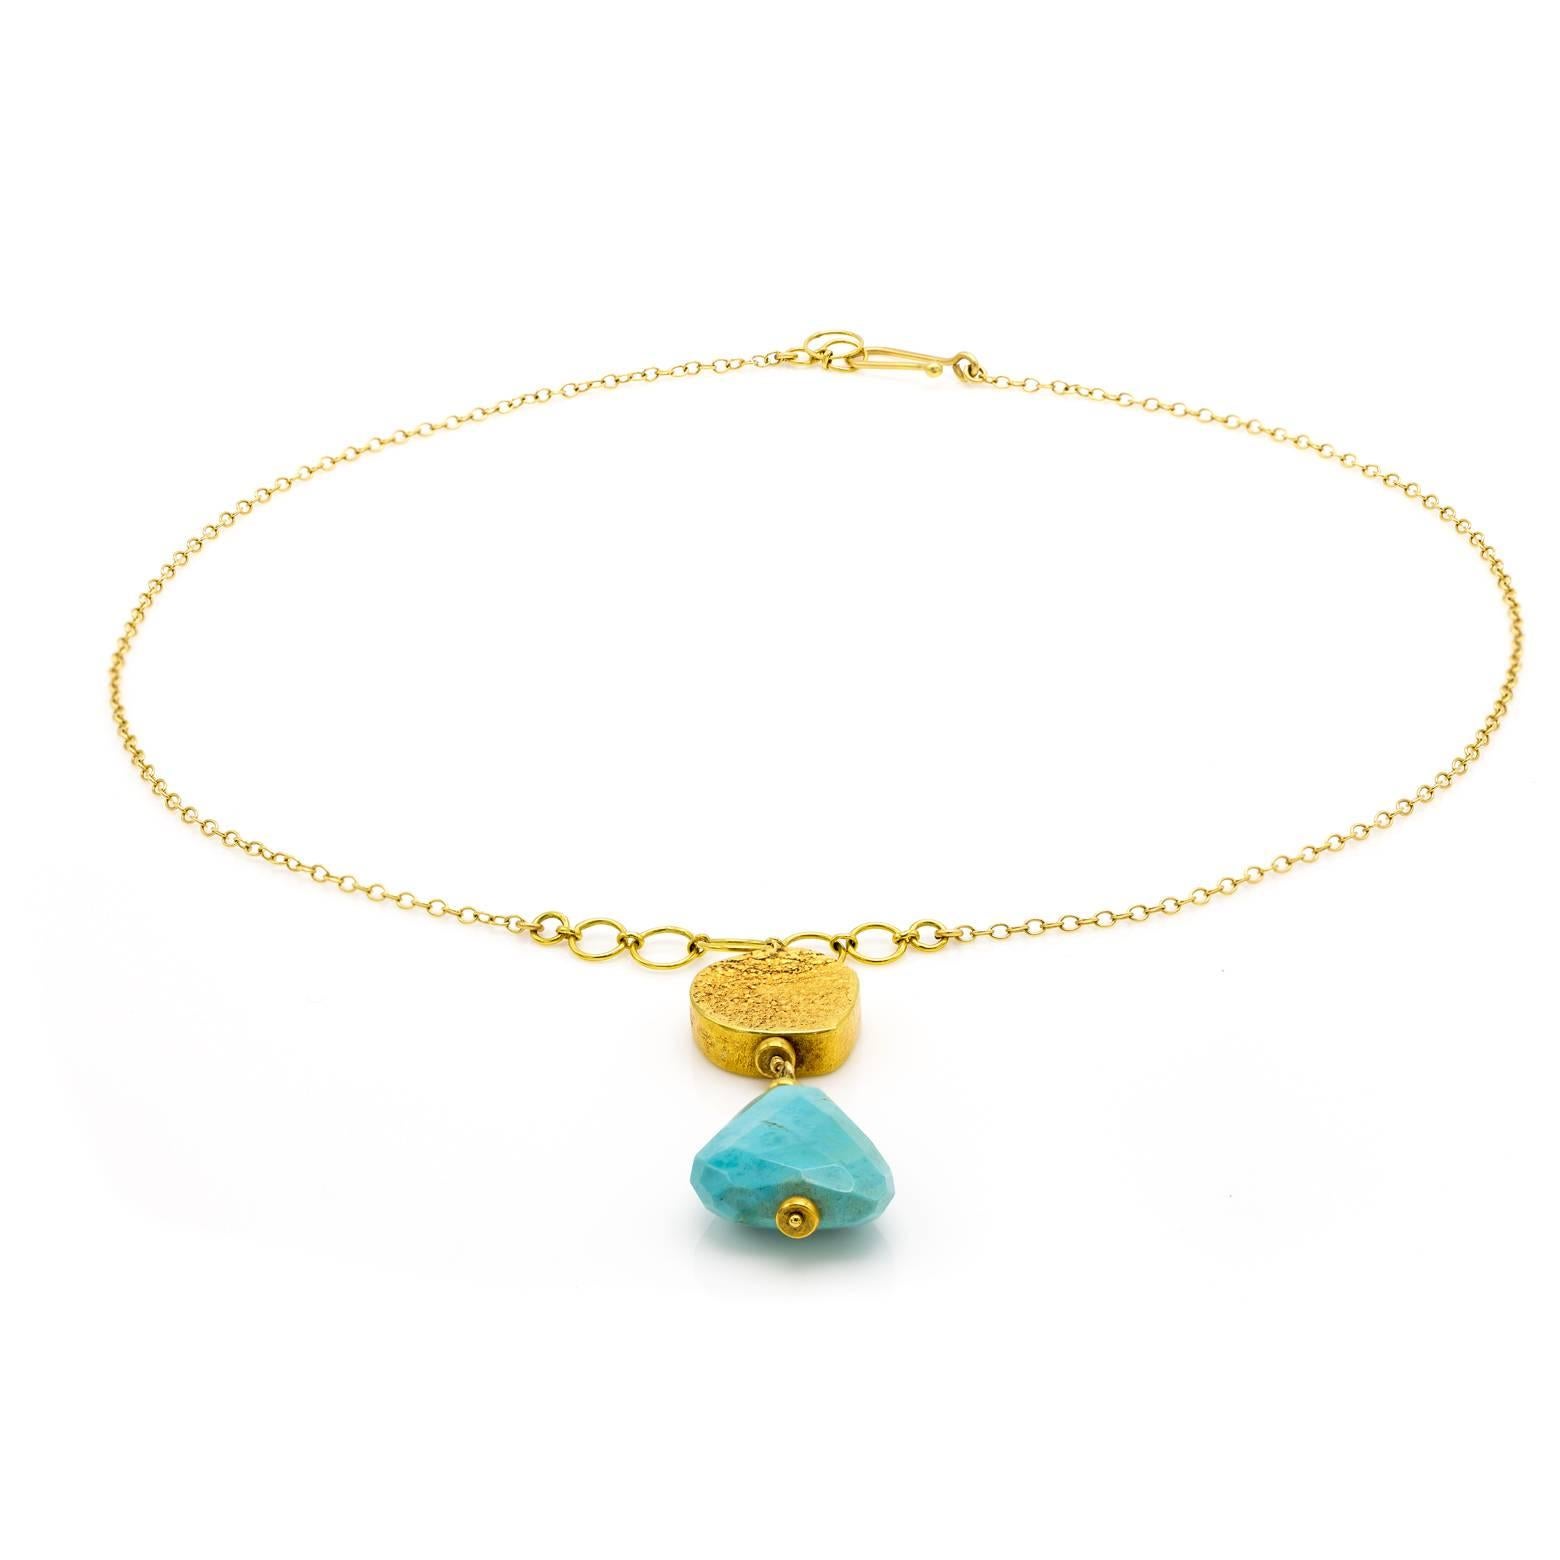 A gorgeous and artistic 18K yellow gold necklace with a substantial faceted turquoise piece. Elegant and easy to dress up or down this necklace sings songs of the Mediterranean Sea and Caribbean Skies. Beautiful textures and a one of a kind